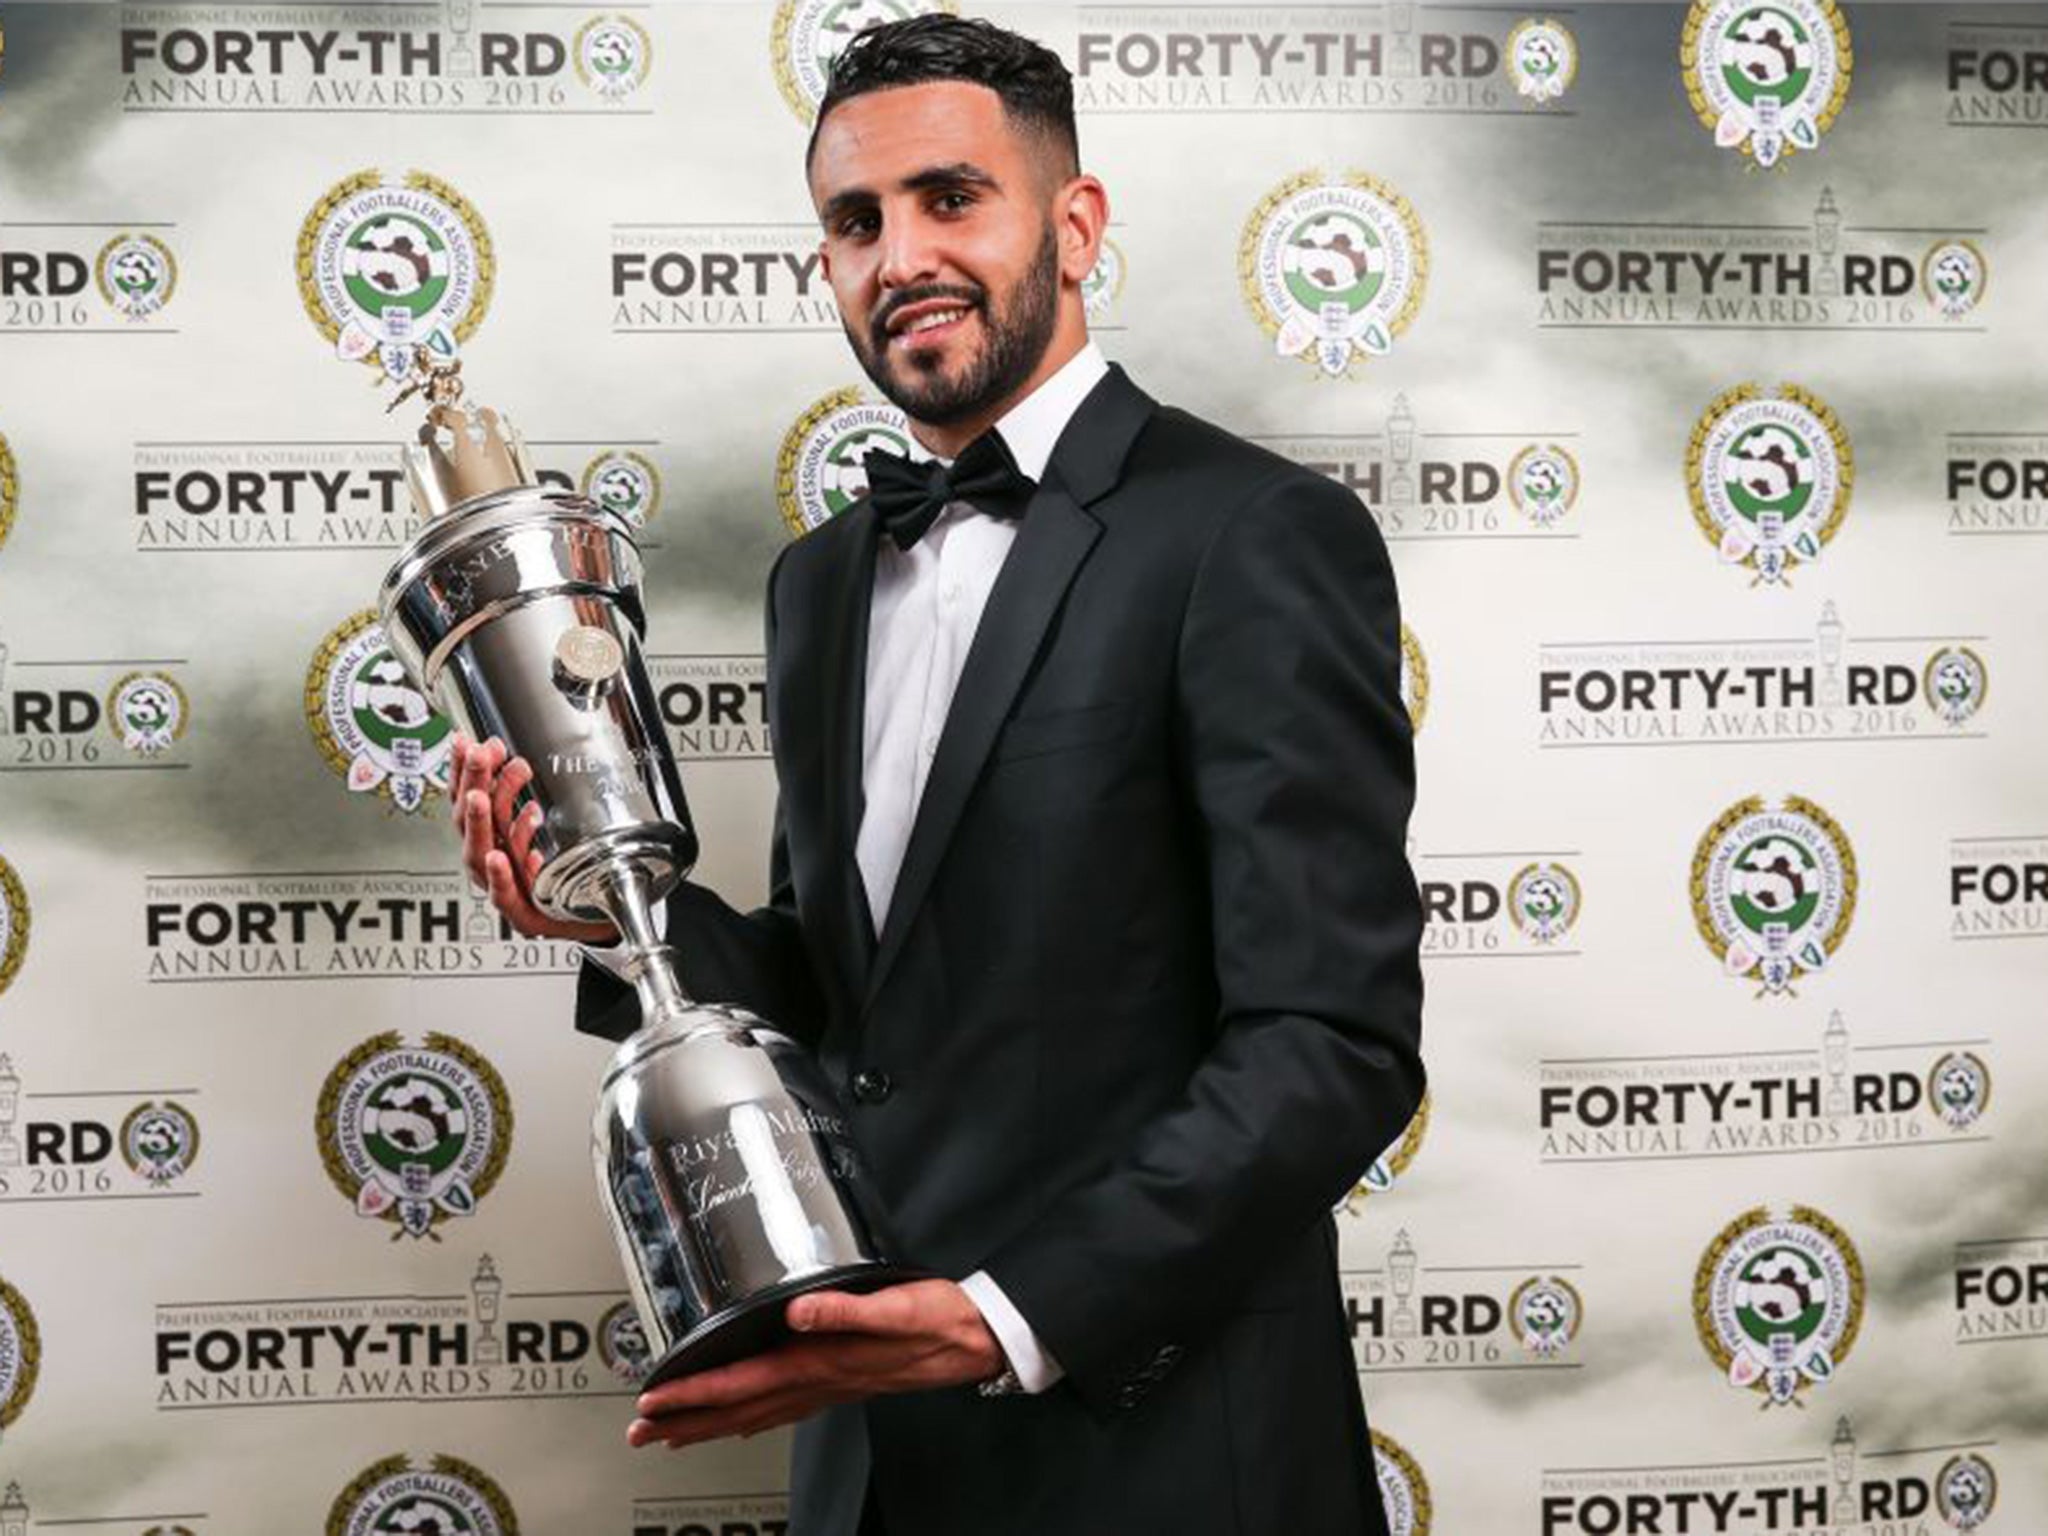 Mahrez is the first African player to win the award